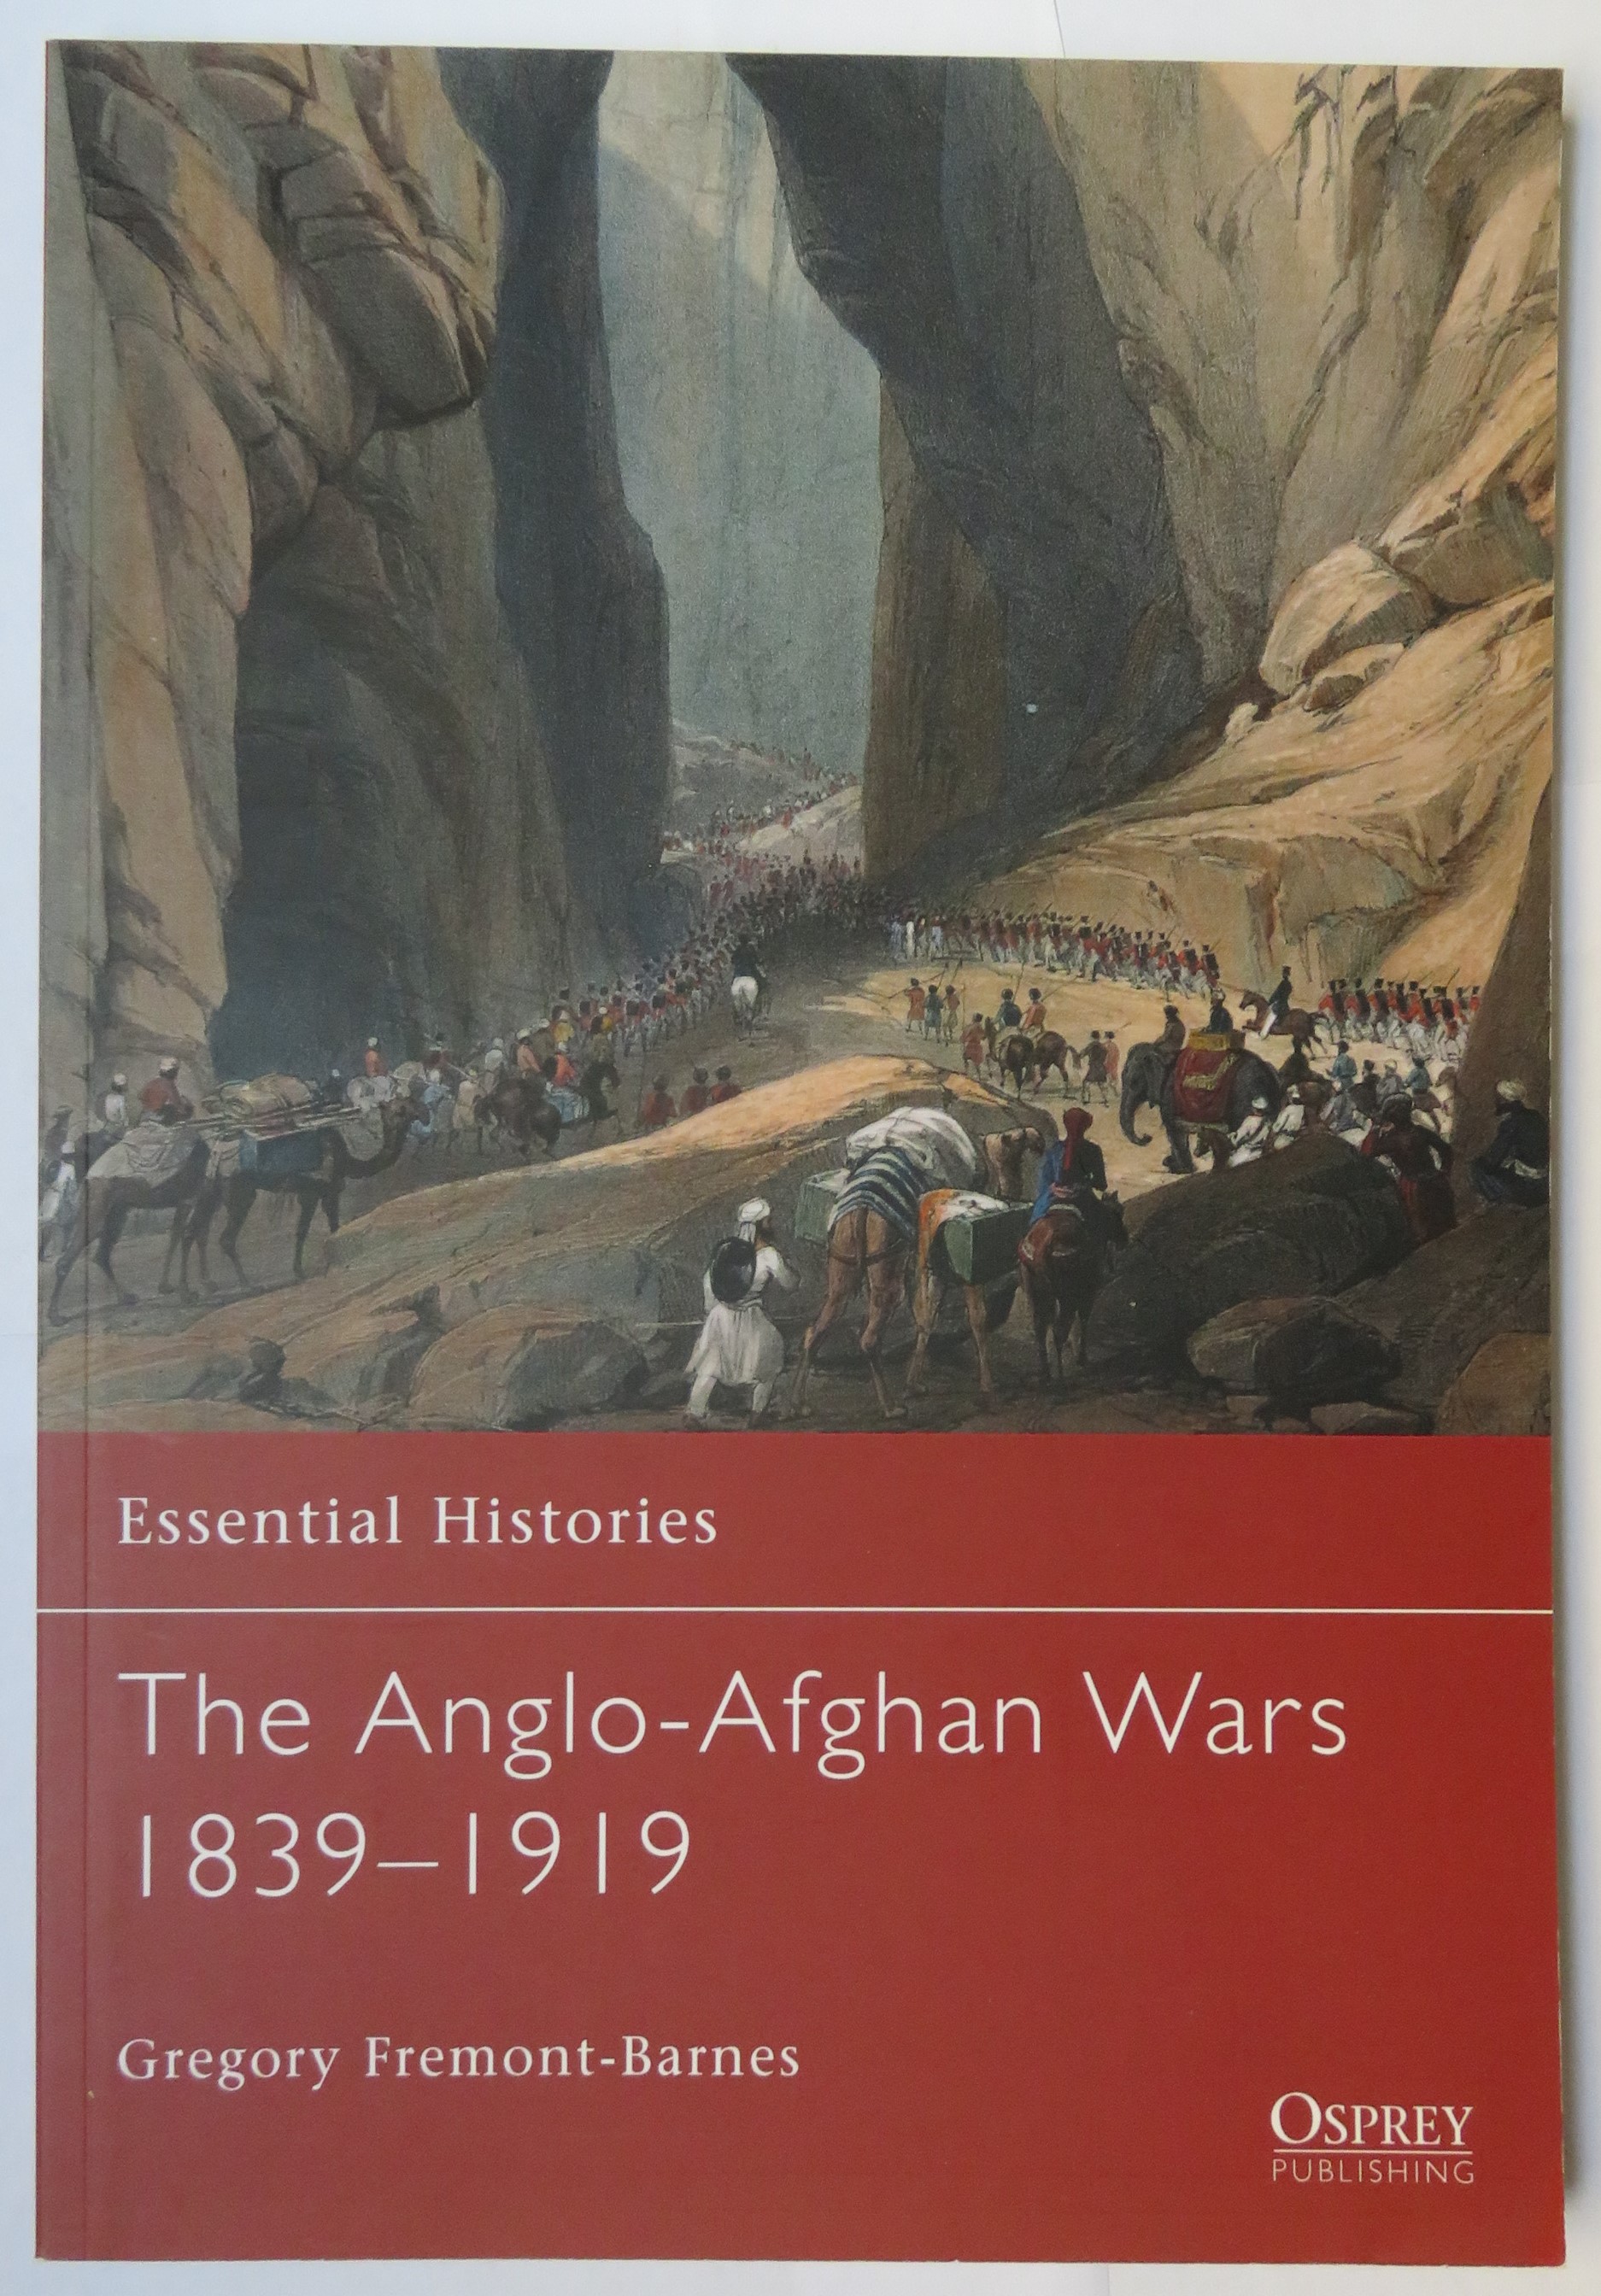 Essential Histories The Anglo-Afghan Wars 1839-1919